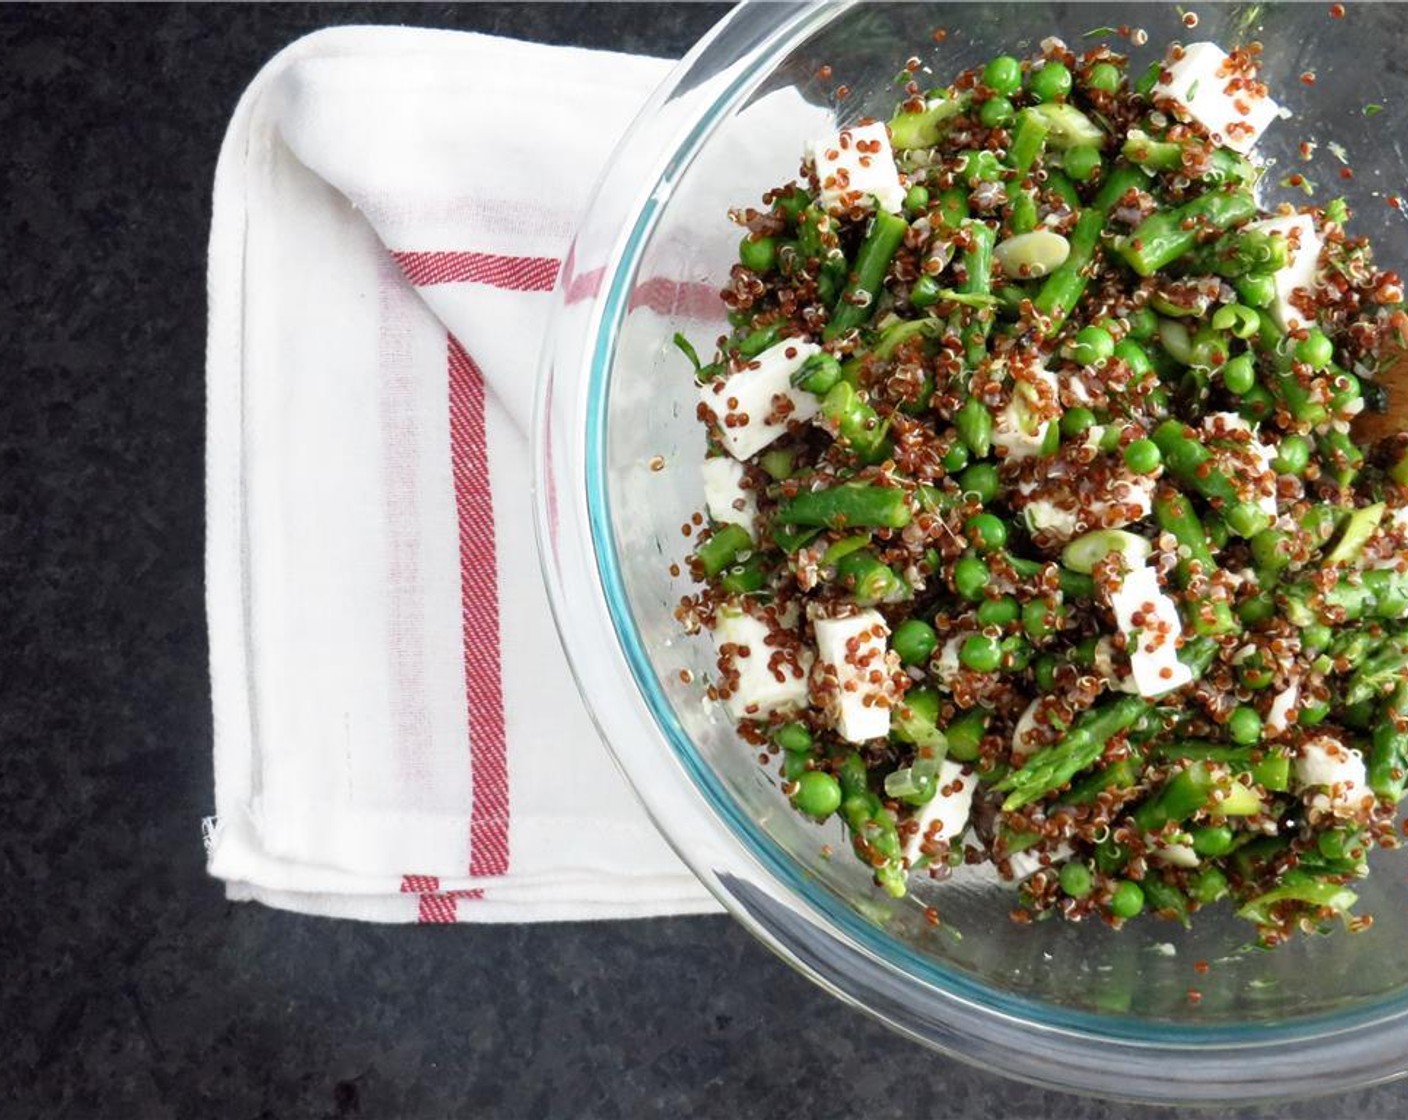 step 7 In a medium bowl, combine the Green Peas (1 cup), asparagus, quinoa, scallions, and feta cheese. Toss with dressing and serve. Enjoy!